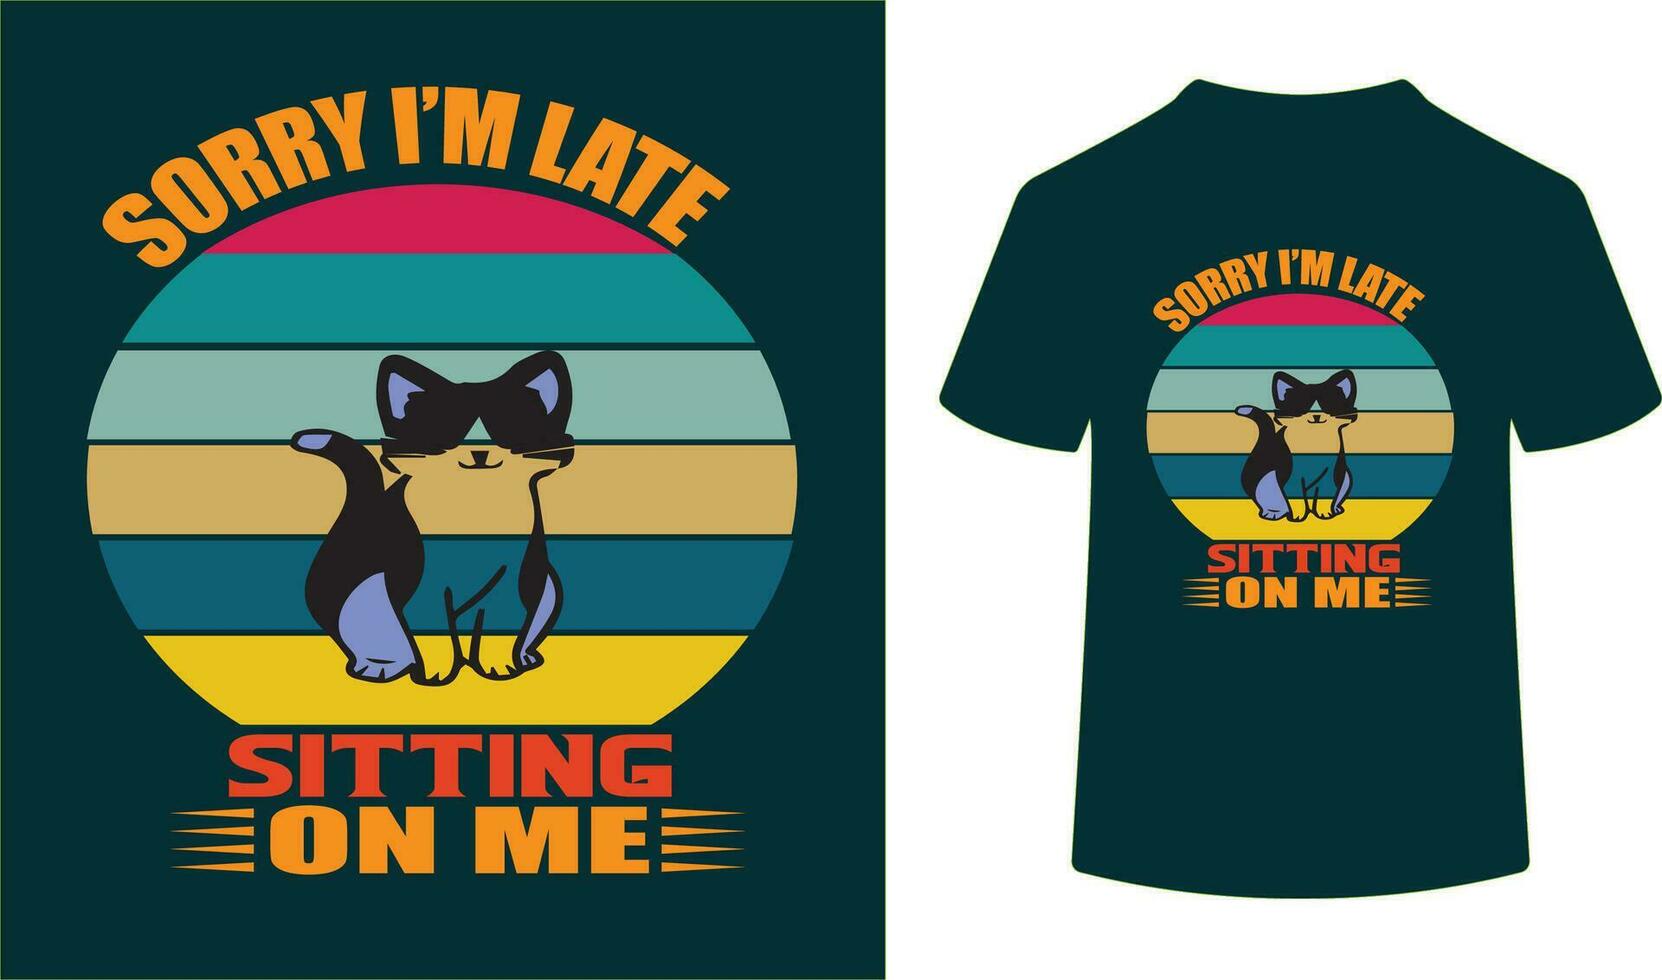 SORRY I'M LATE SITTING ON ME-CAT LOVER FUNNY QUOTE vector